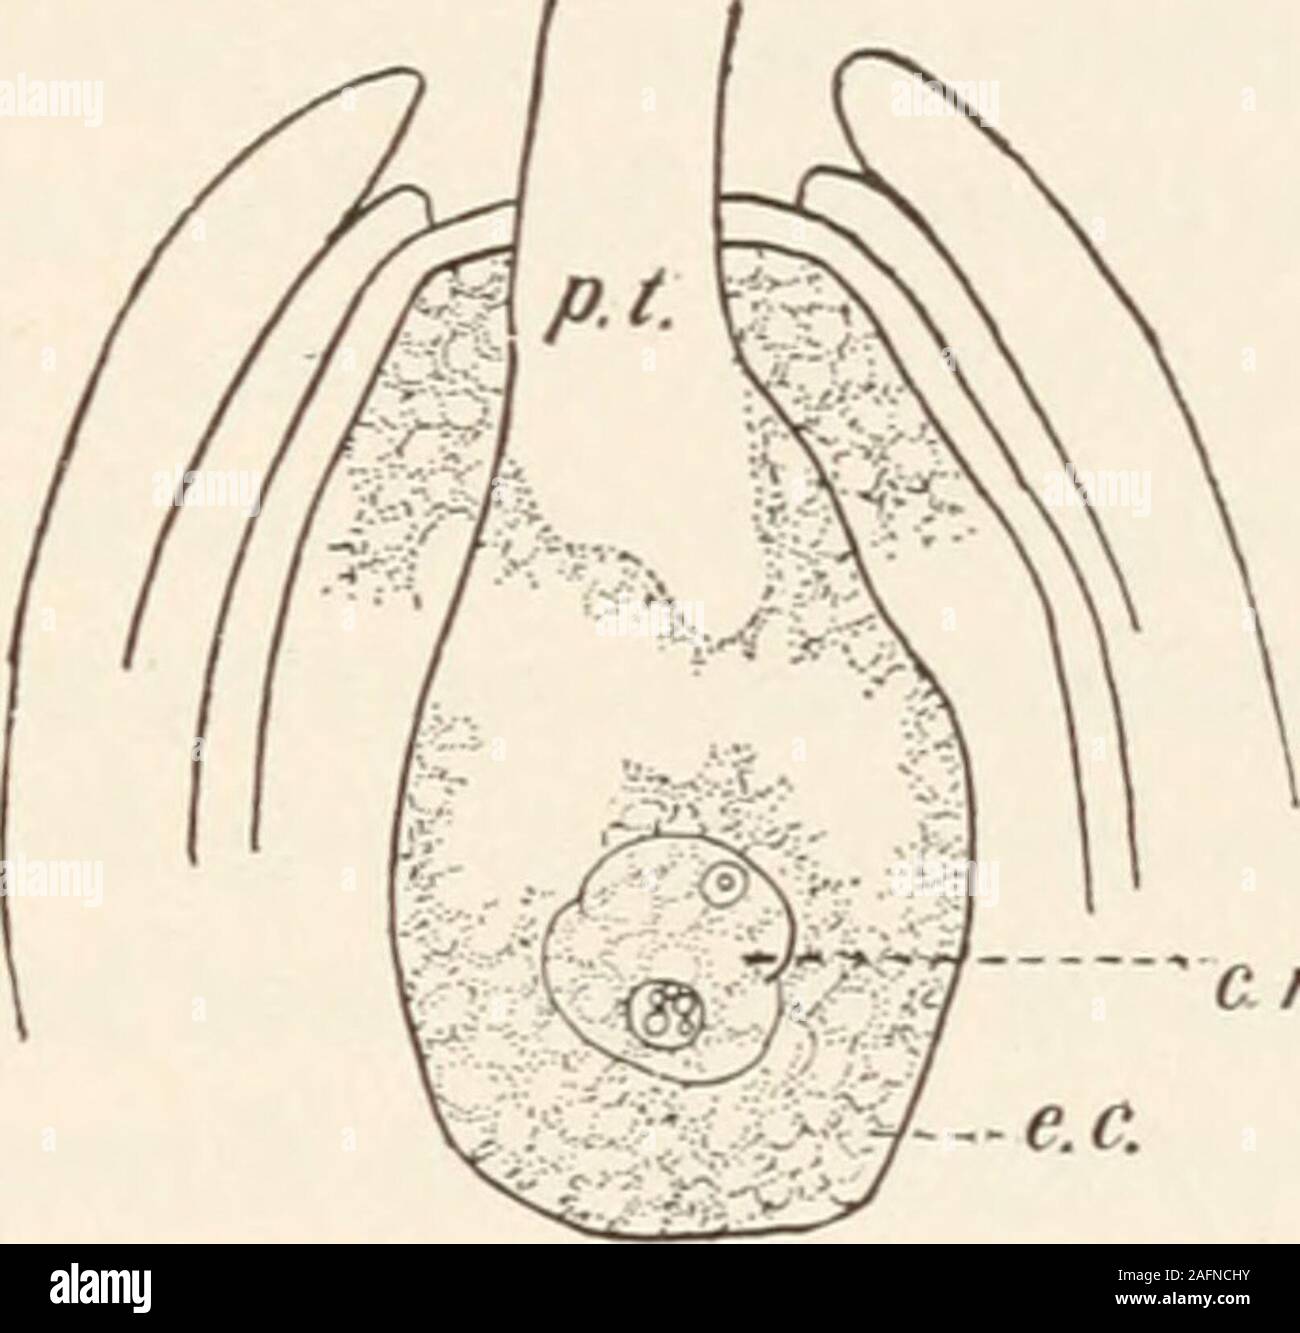 . The animans and man; an elementary textbook of zoology and human physiology. c n. s.n. FIG. 235. Diagram of section of pistil and ovary of a flower, showing thedescent of the pollen tube and its entrance into the ovule, p. g., pollen-grain; p. /., pollen-tube; e. s., embryo sac; e. c., egg-cell; s. n., spermnucleus. Left-hand figure (1) shows the pollen-tube grown down,around and up into the ovary with the sperm-nucleus just entering theovule; right-hand figure (2) shows the fusion of the sperm-nucleus.(After Stevens.) animals; a germ- (sperm-) cell from one individual (male orhermaphrodite) Stock Photo